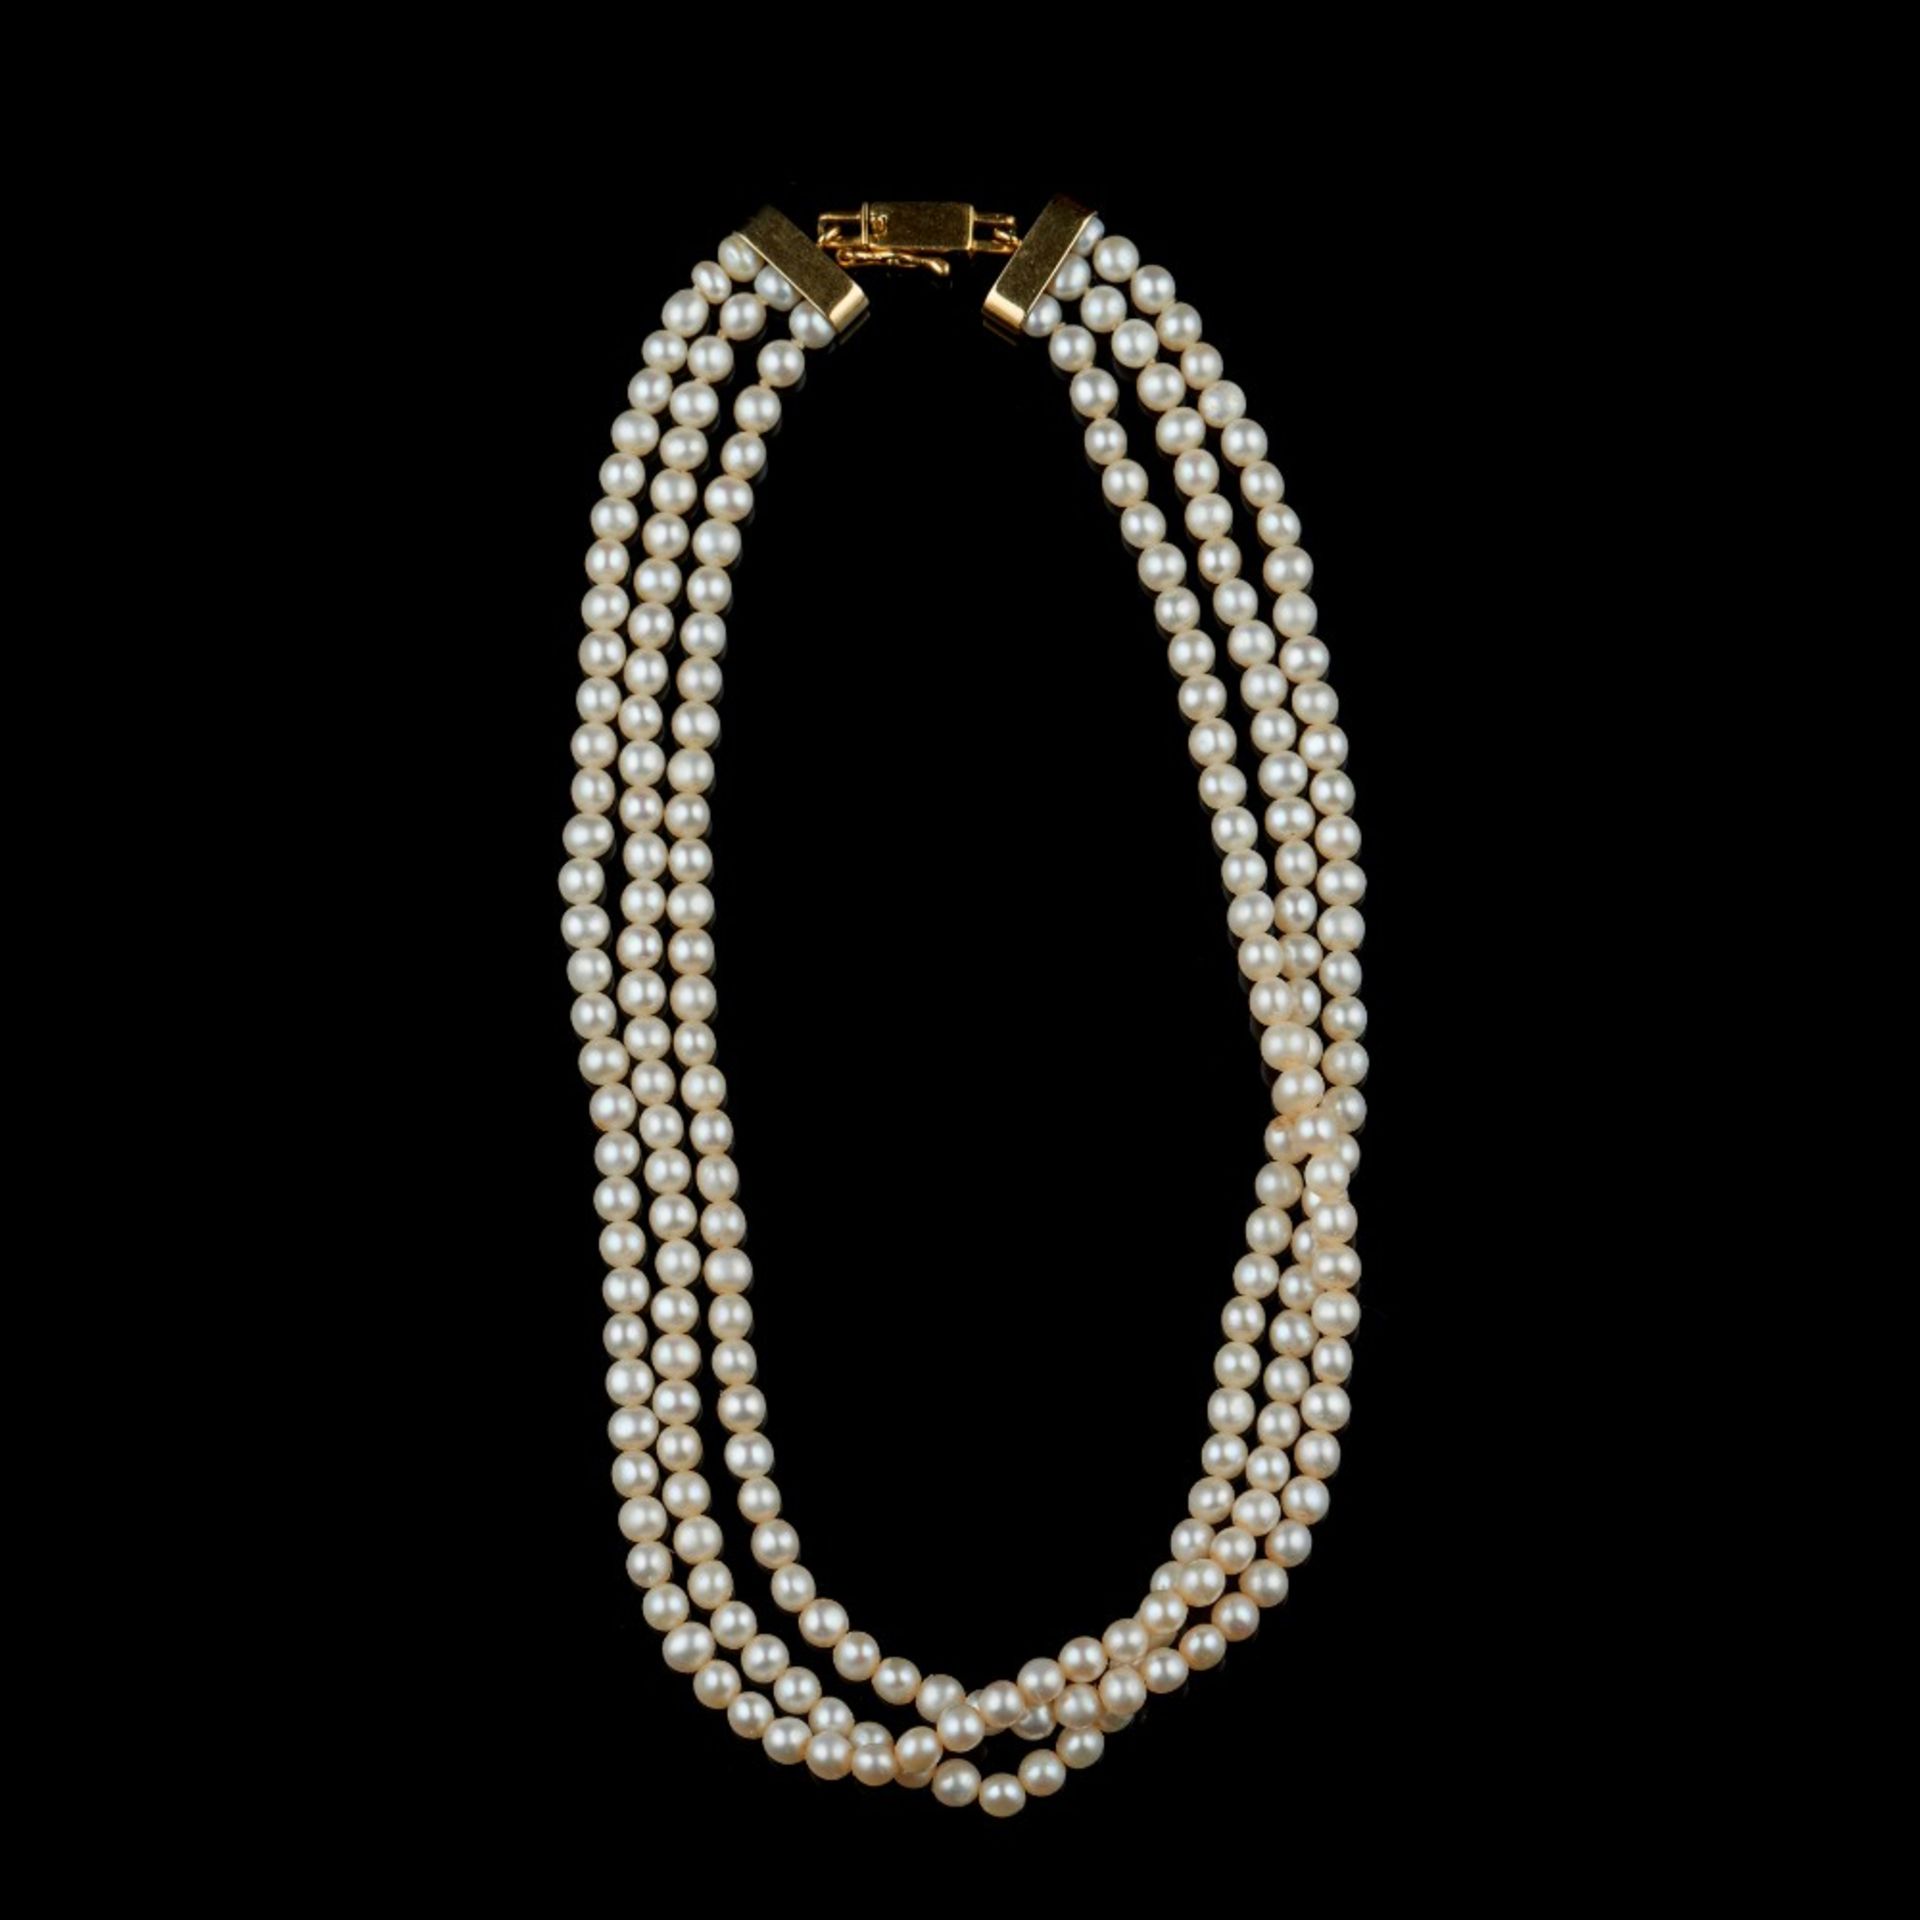  A pearl necklace